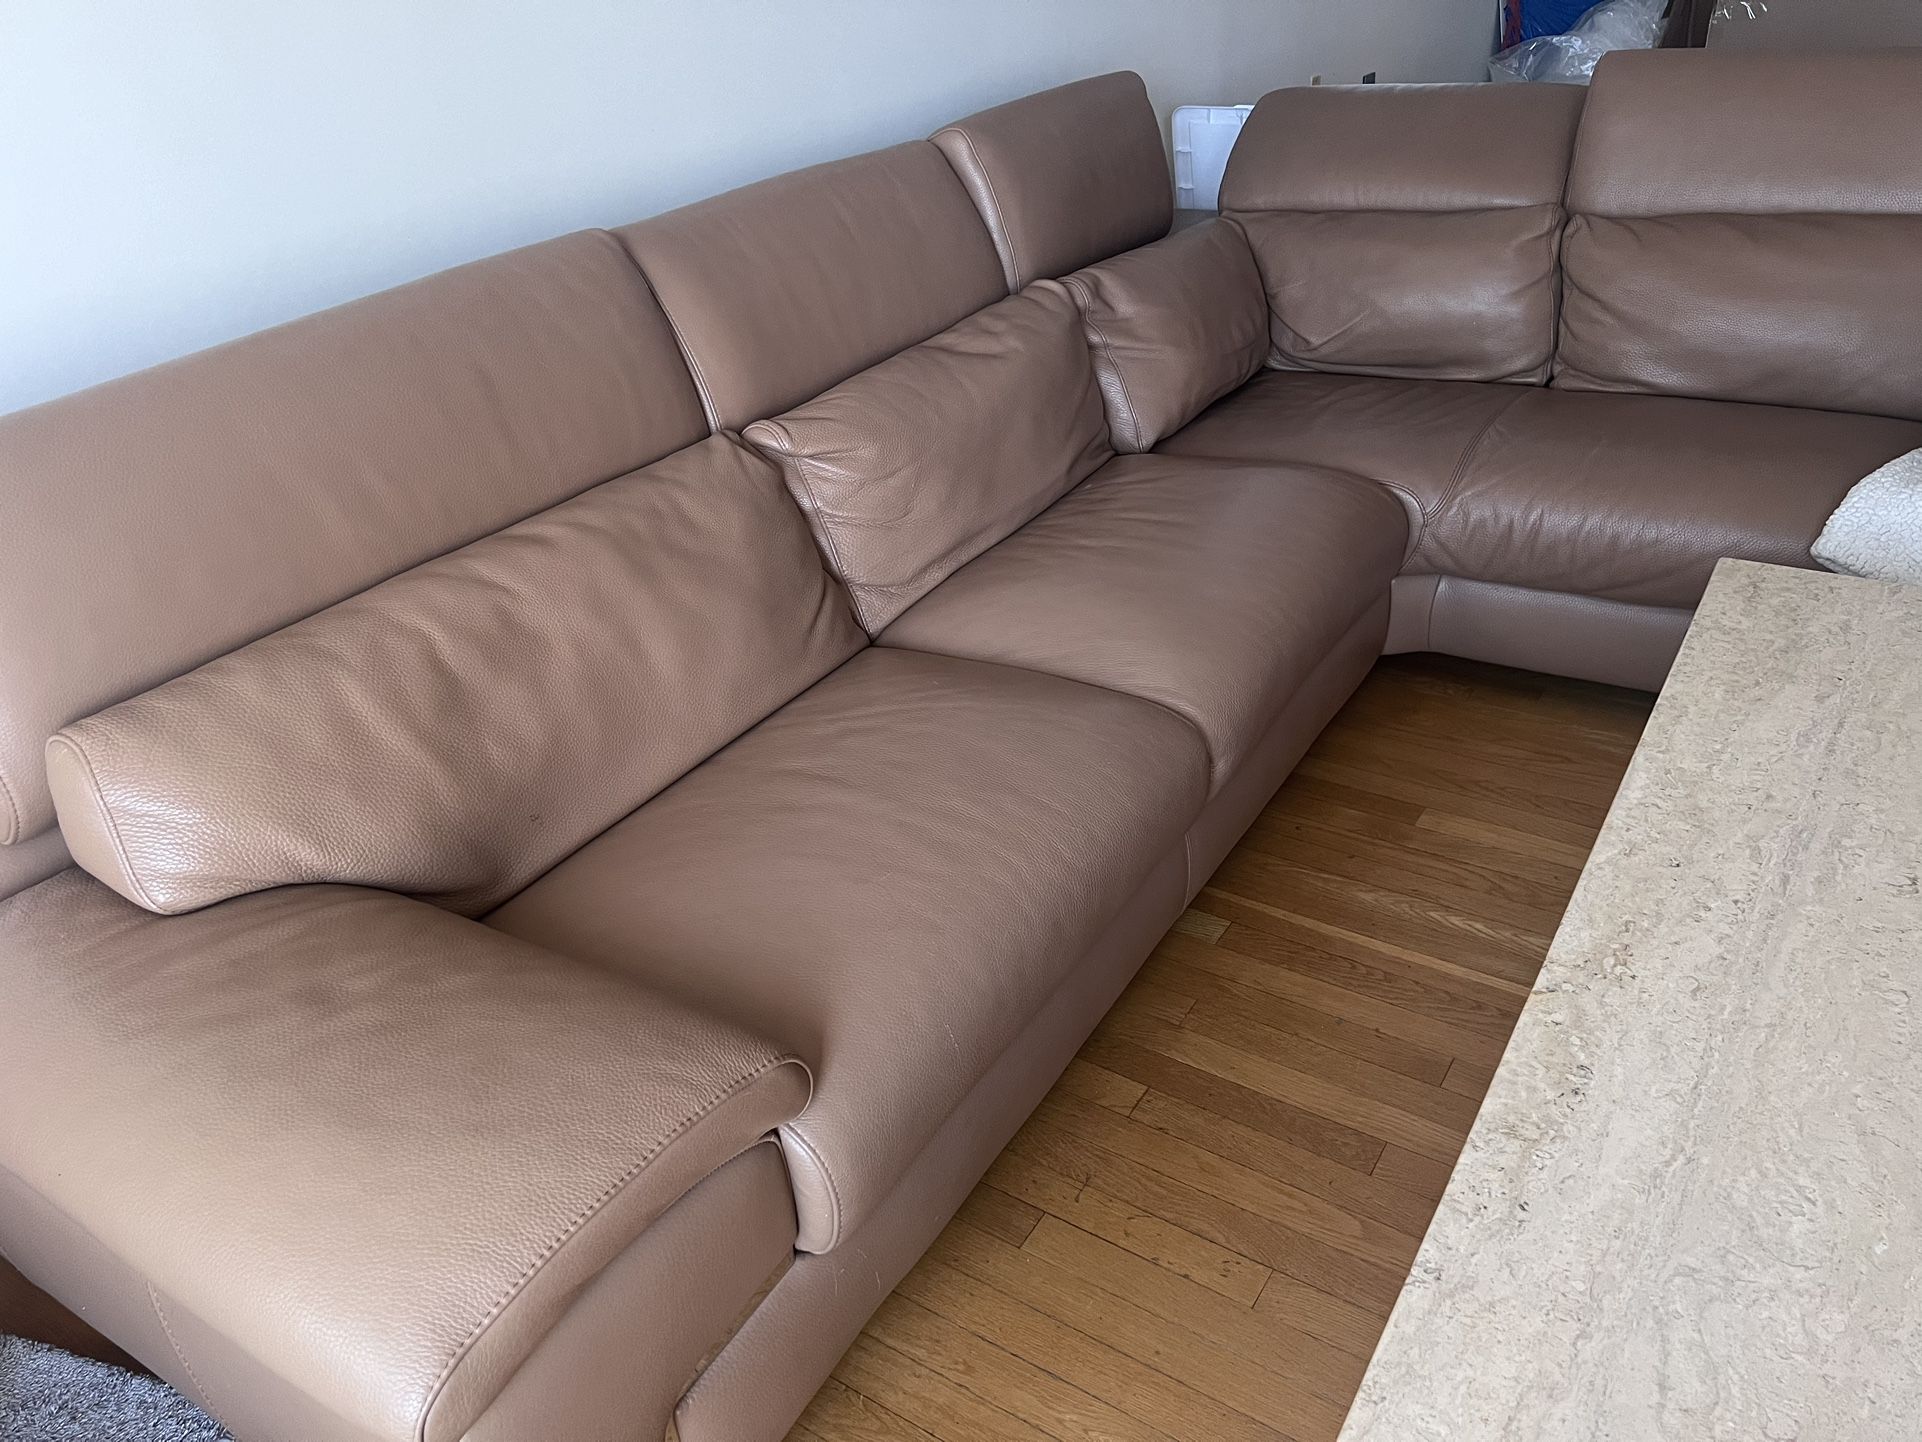 Leather Couch And Lounge Chair